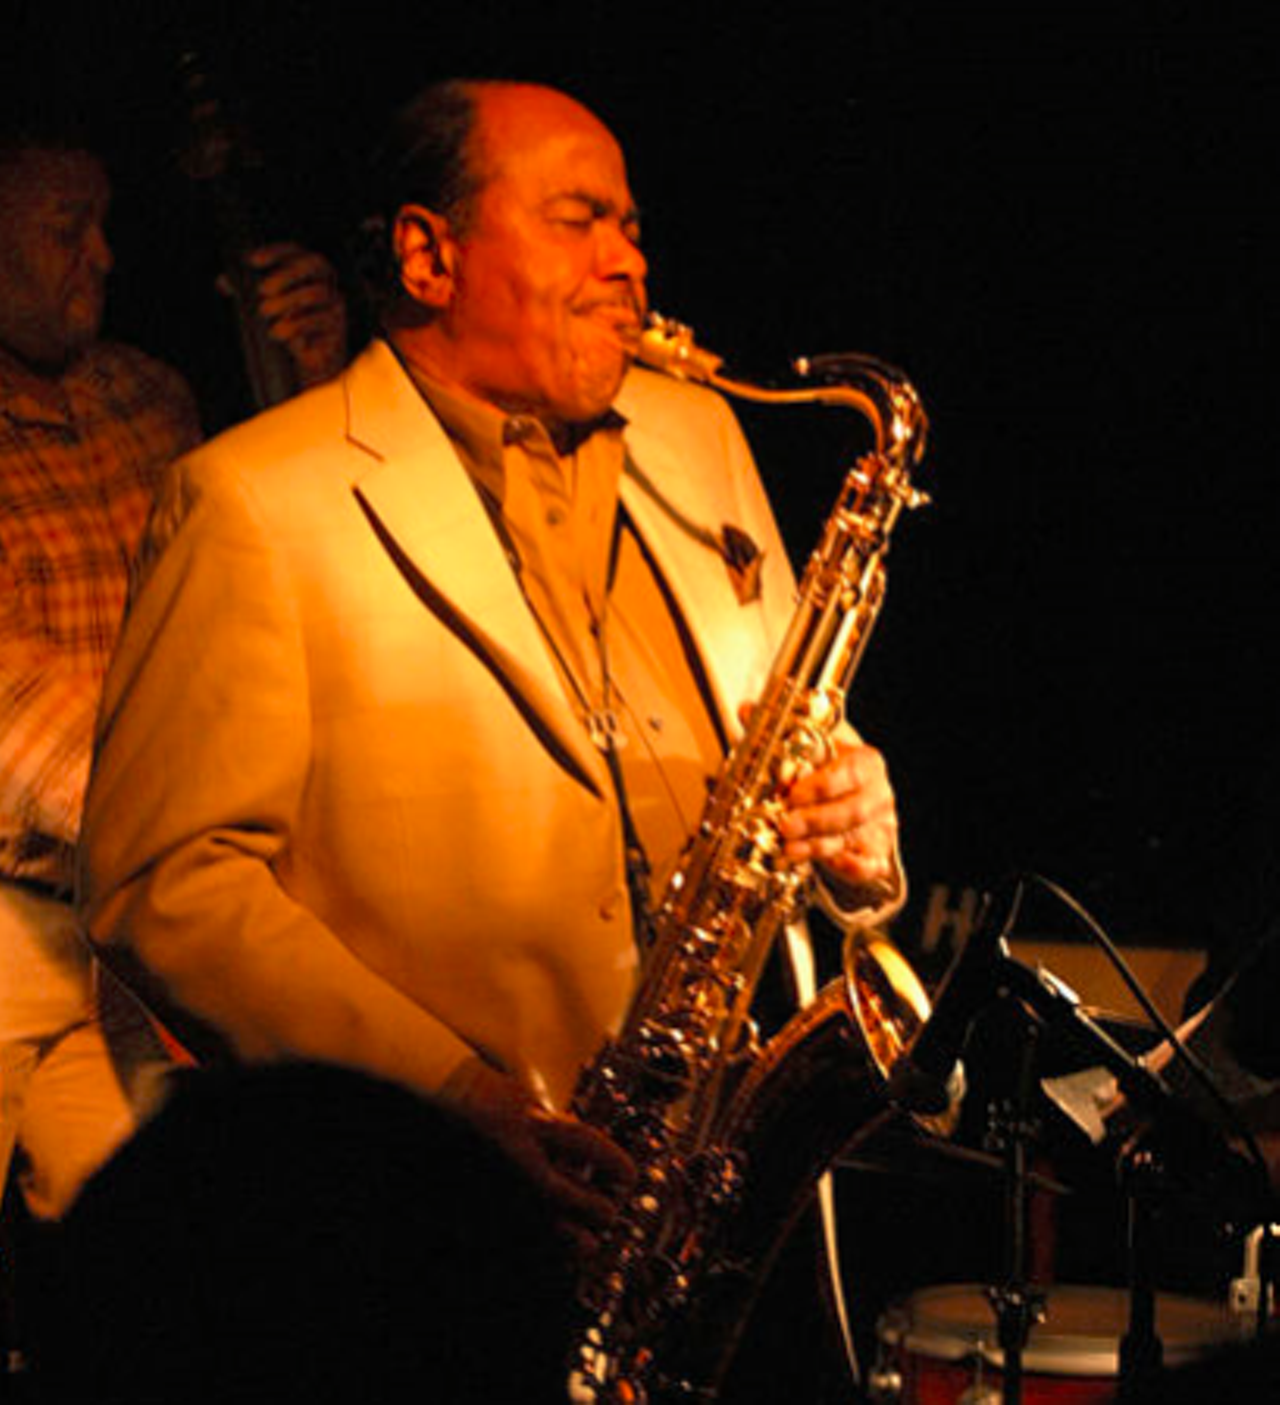 Benny Golson, who’s contributed several tunes to the standard repertoire of jazz music, has been playing sax and writing music for more than 55 years, refining his style and evolving with the genre. The cool laid-back sound he’s known for has that head-bobbing, finger-snapping feel that makes you want to lean back and relax. The standard “I Remember Clifford,” is a blue elegy that holds a bittersweet mystery. Another classic Golson hit, “Stablemates,” opens with a jerky drum solo that drops into a sparse quirky melody. At 80 years old, Golson has definitely aged well, so get to Night Town tonight to hear a masterful performance by him and his quartet. (Gonzalez) $20-$30